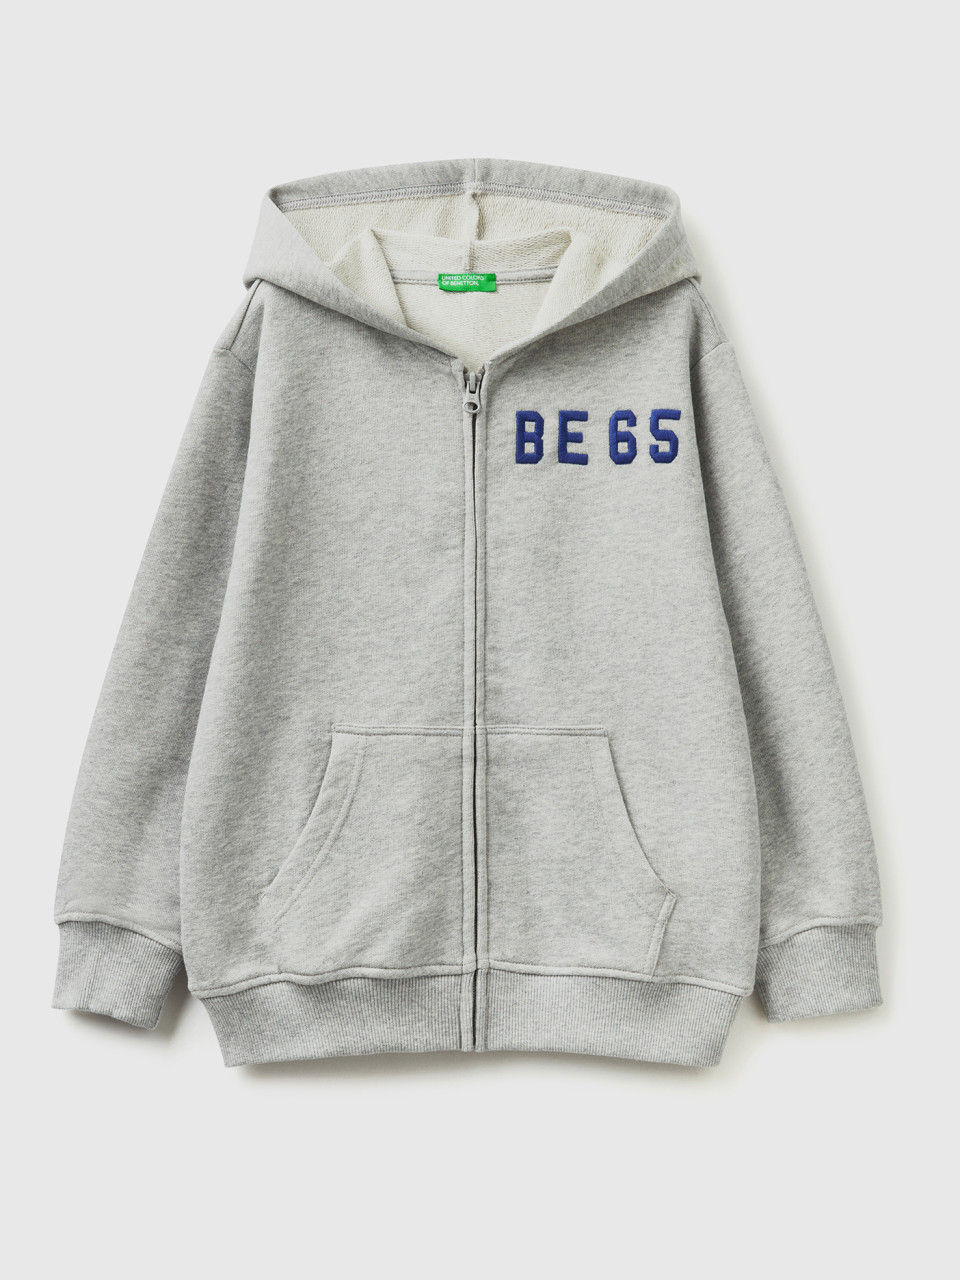 Benetton, Hoodie With Zip And Embroidered Logo, Light Gray, Kids